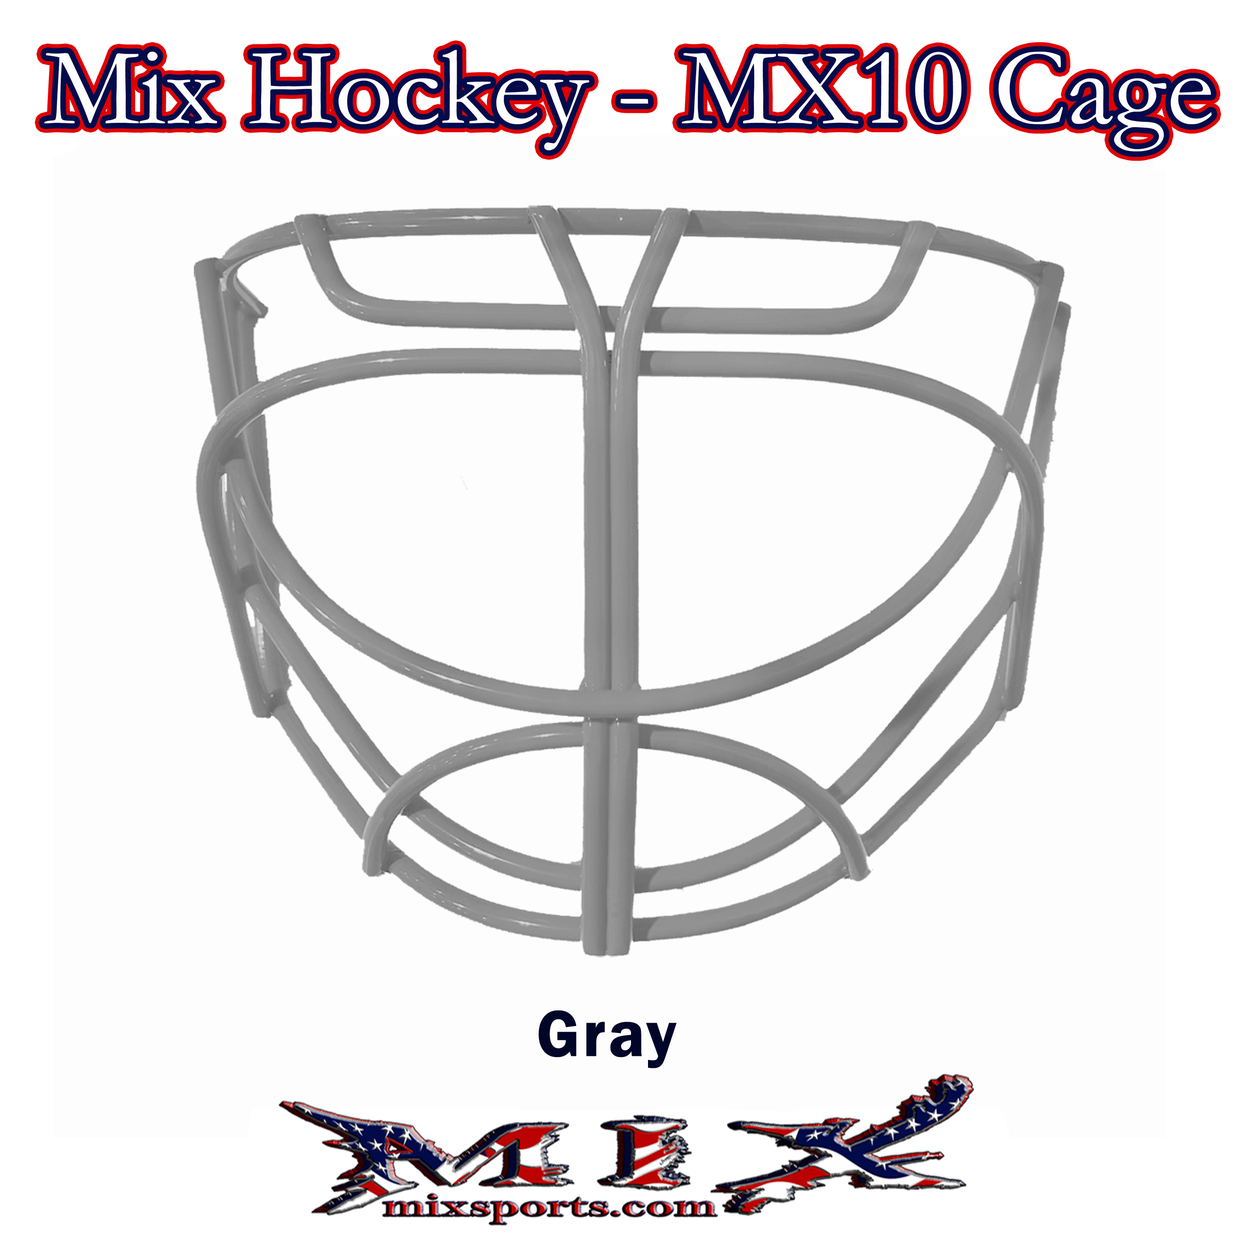 Mix Hockey - MX10 Cat Eye Goalie cage (Includes clips and screws) - Gray